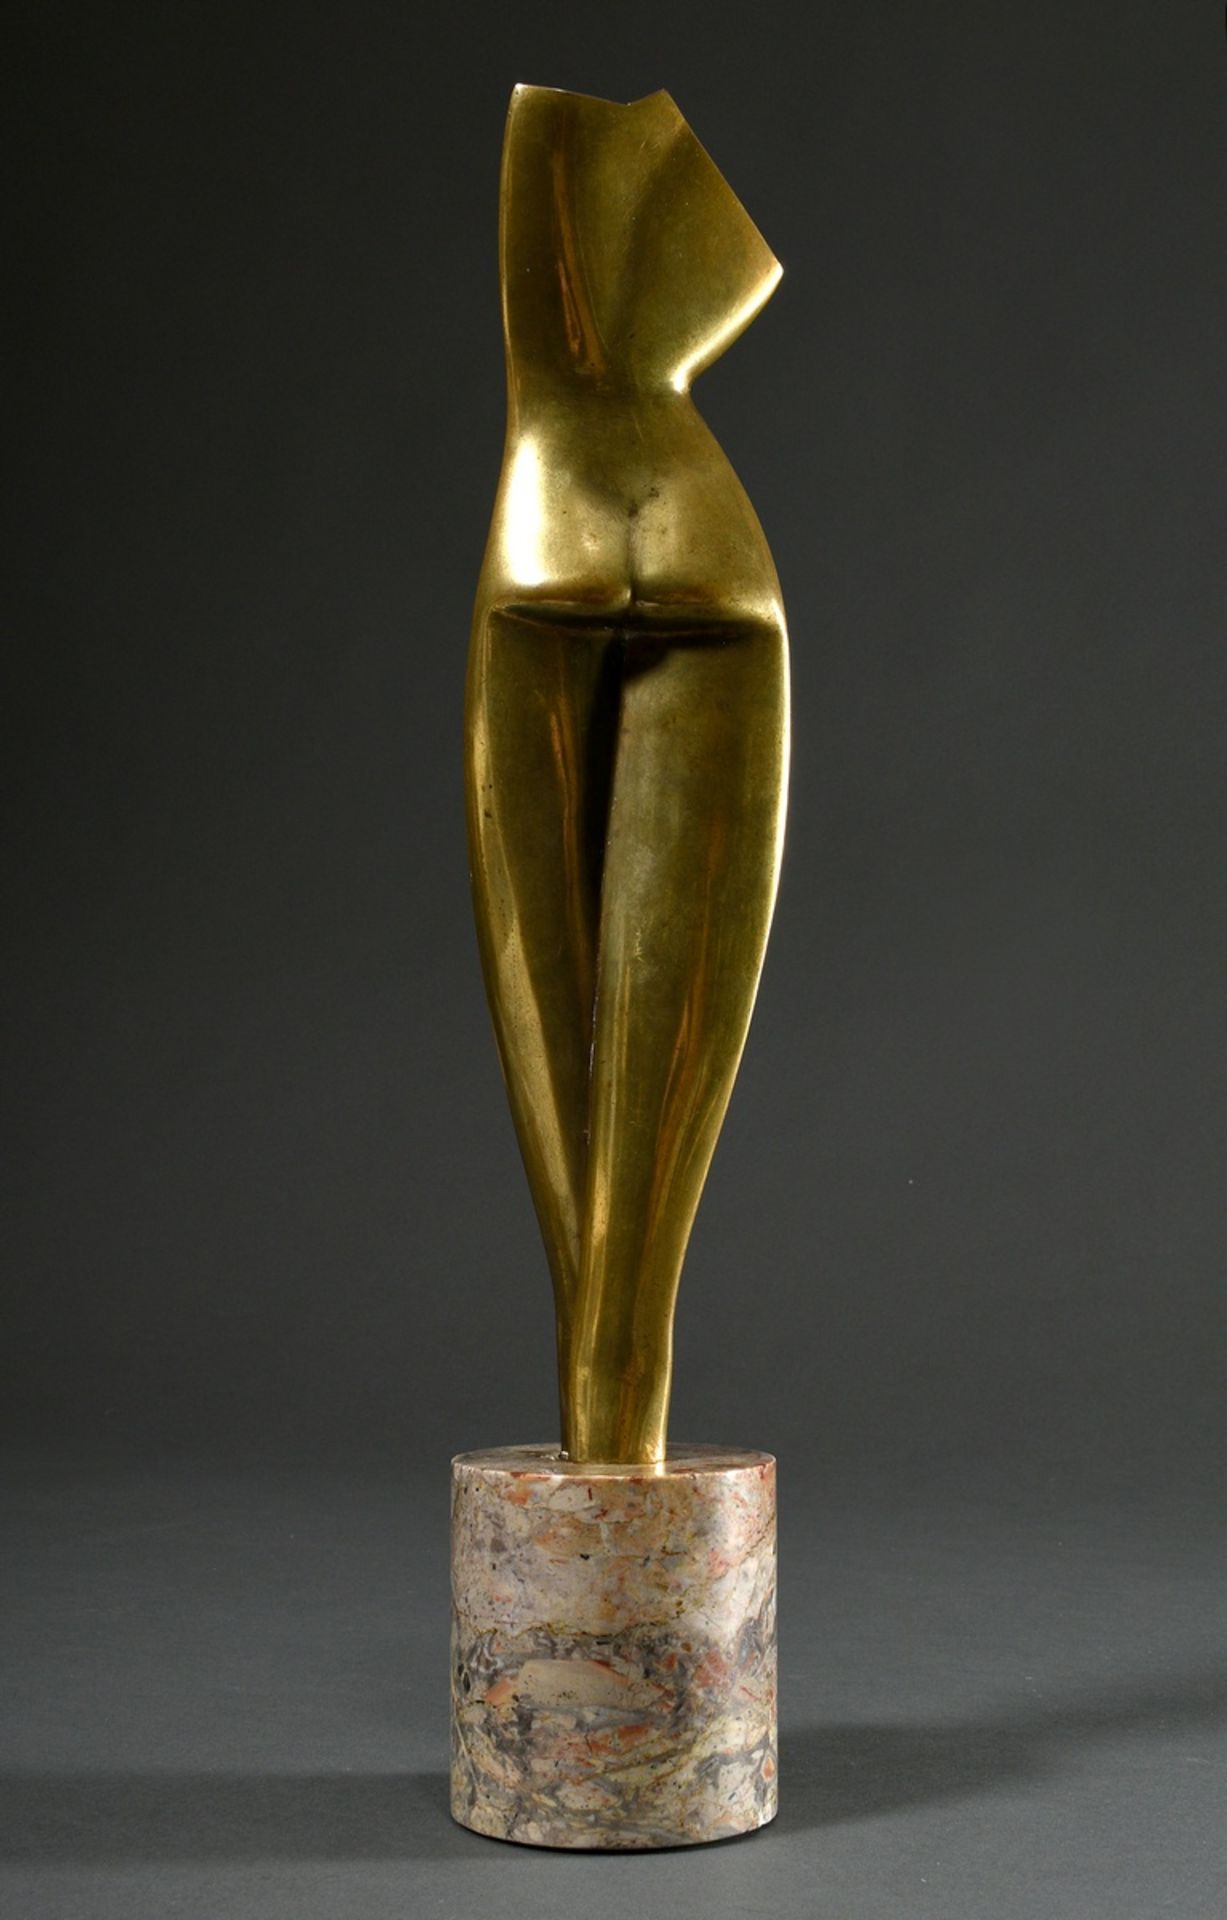 Archipenko, Alexander (1887-1964) "Flat Torso" 1914, early life cast around 1920, bronze with gold- - Image 4 of 17